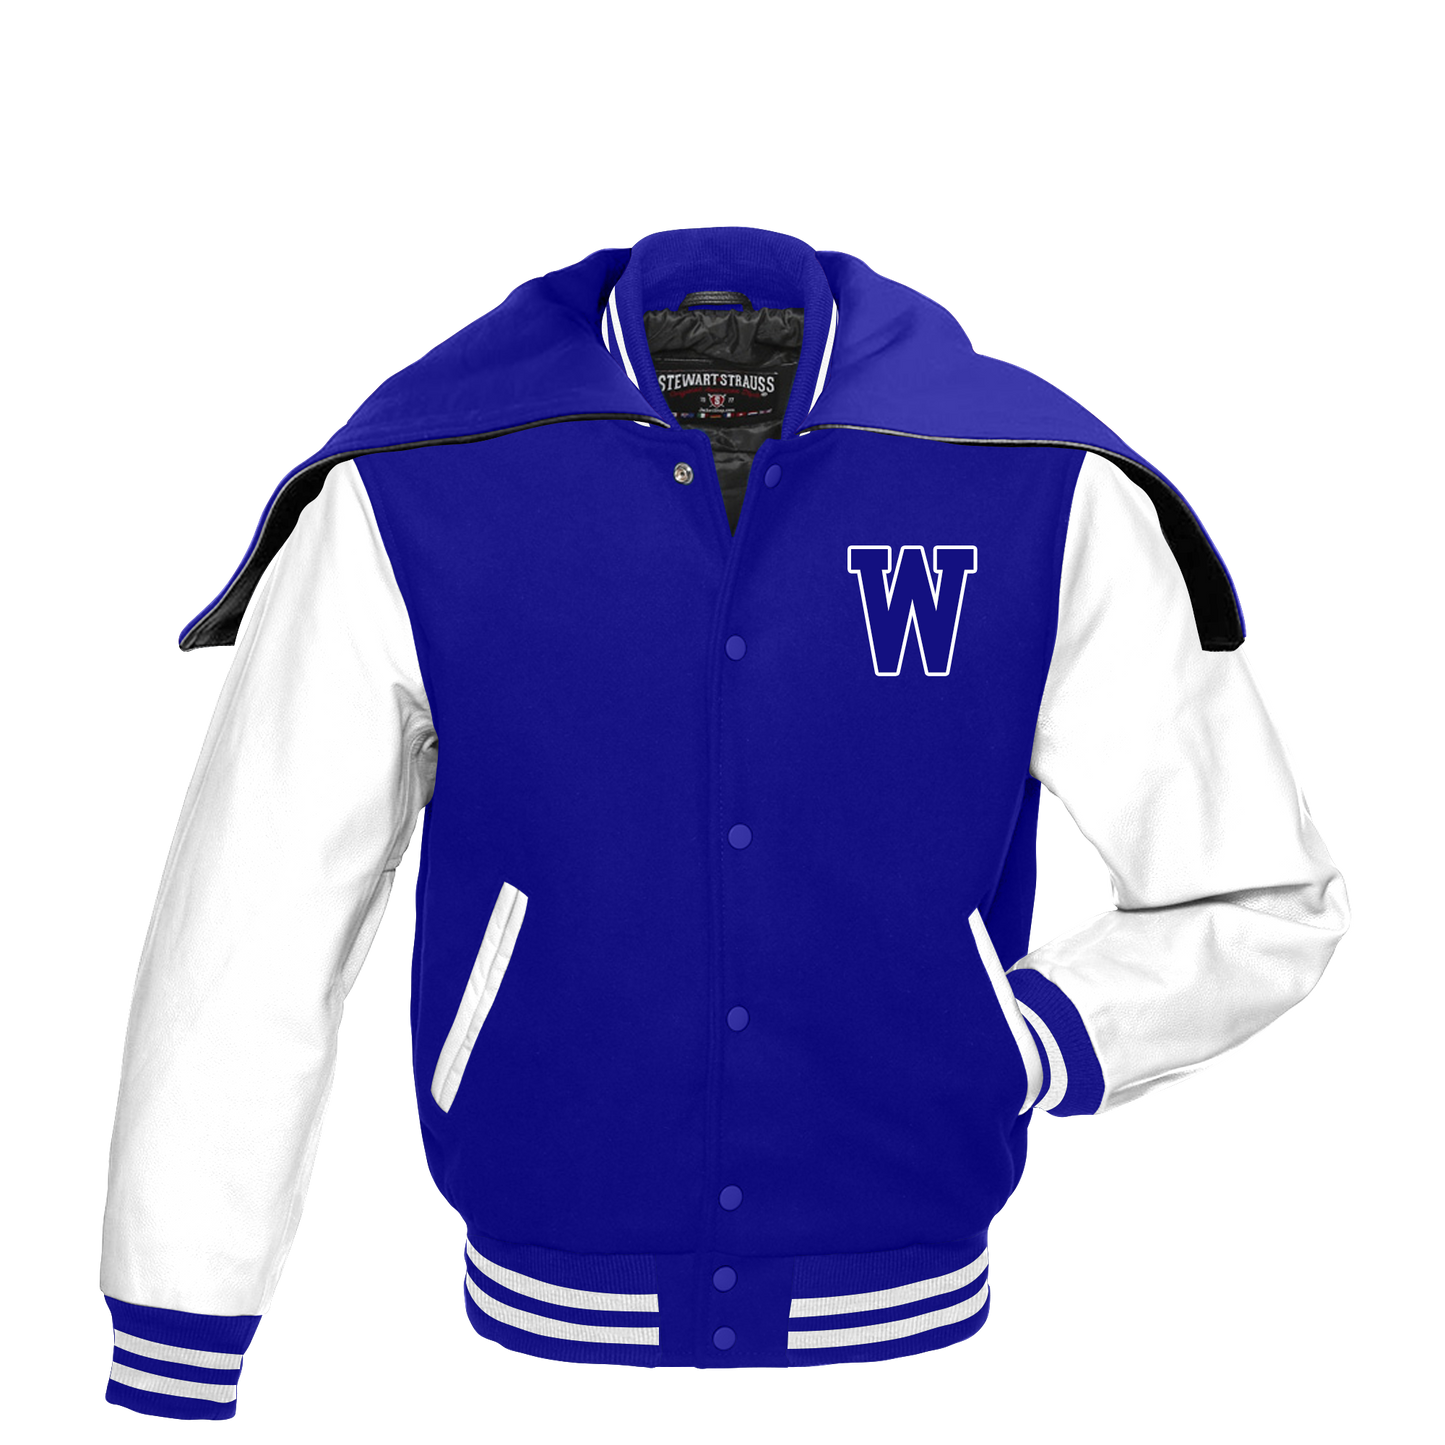 3rd Payment Western Cheer Group Order